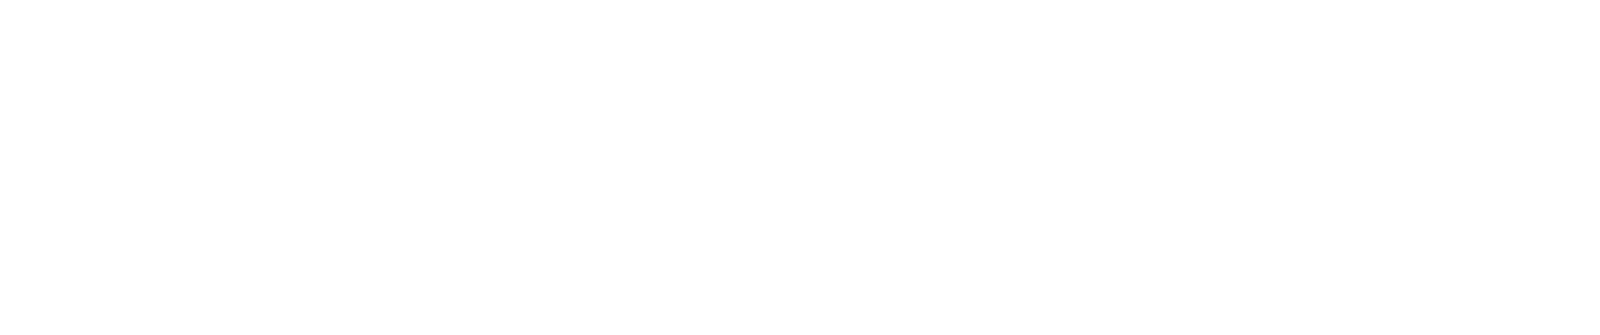 2013 A Simple Gift Directed By Tom Gallus